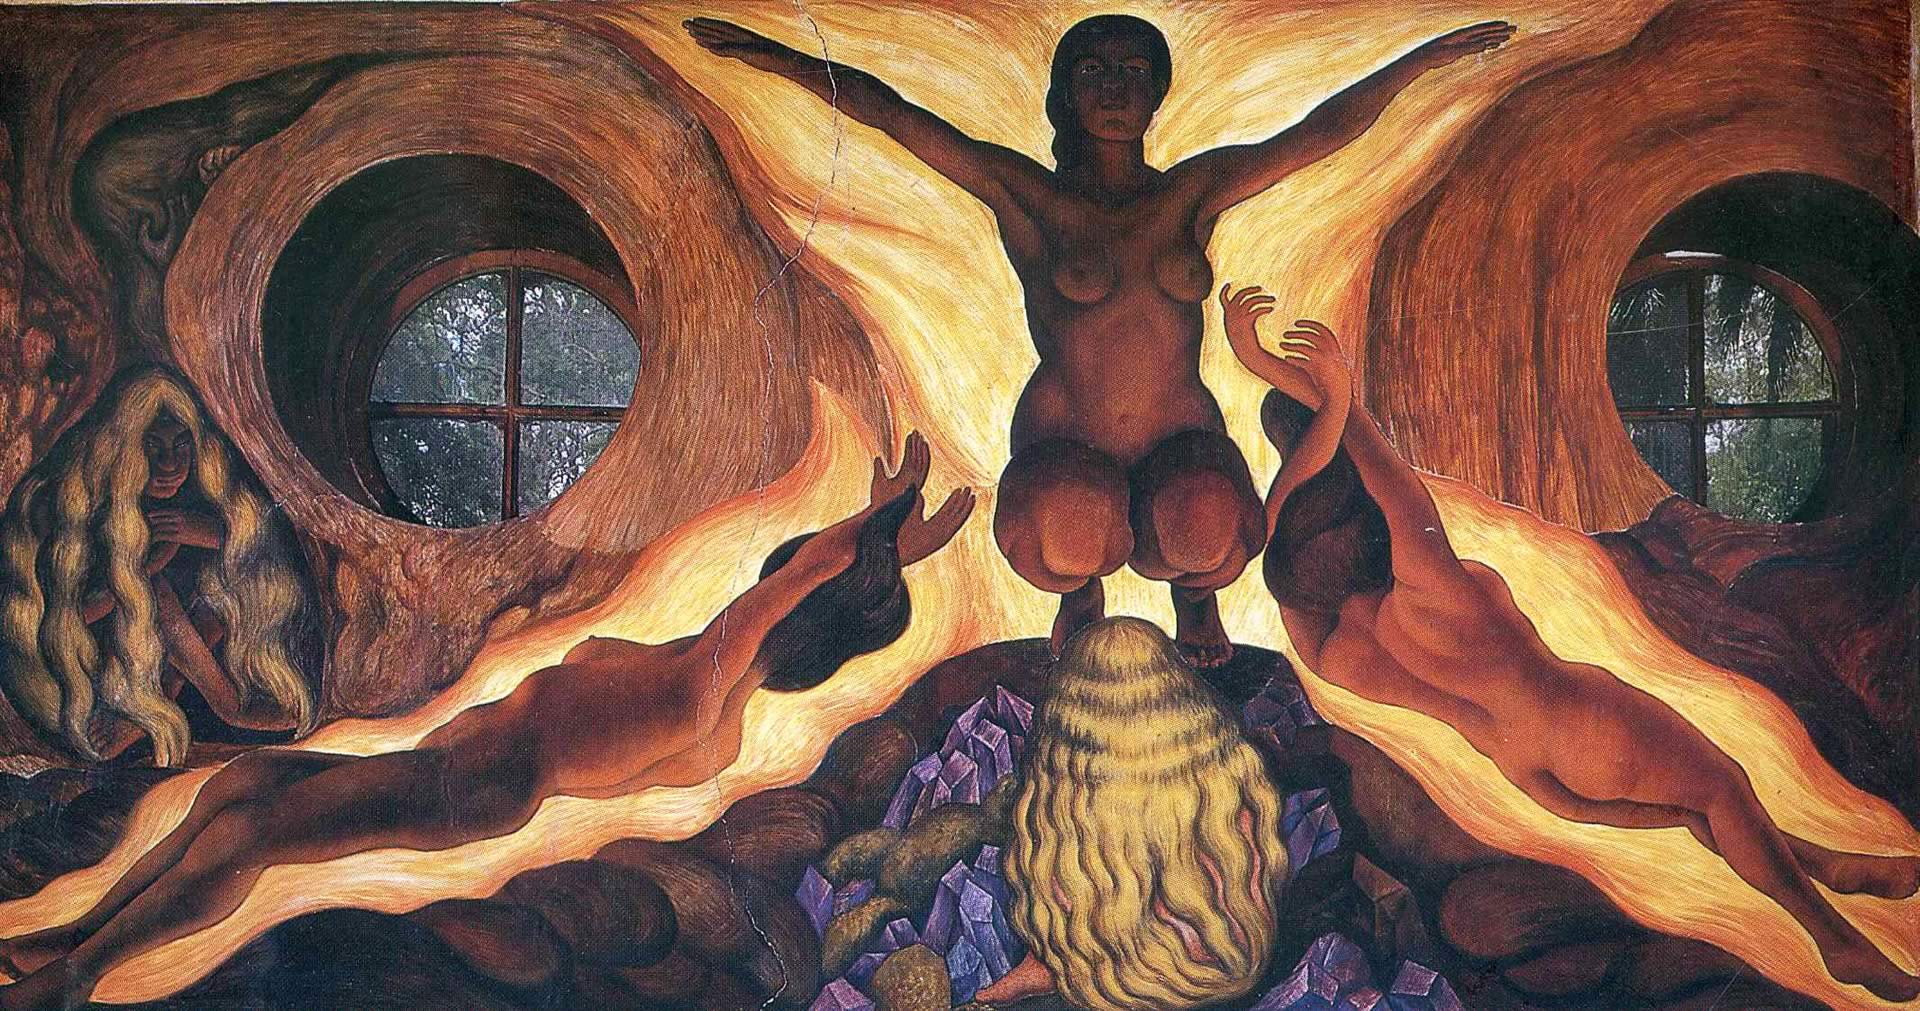 Subterranean Forces Diego Rivera Paintings Wallpaper Image